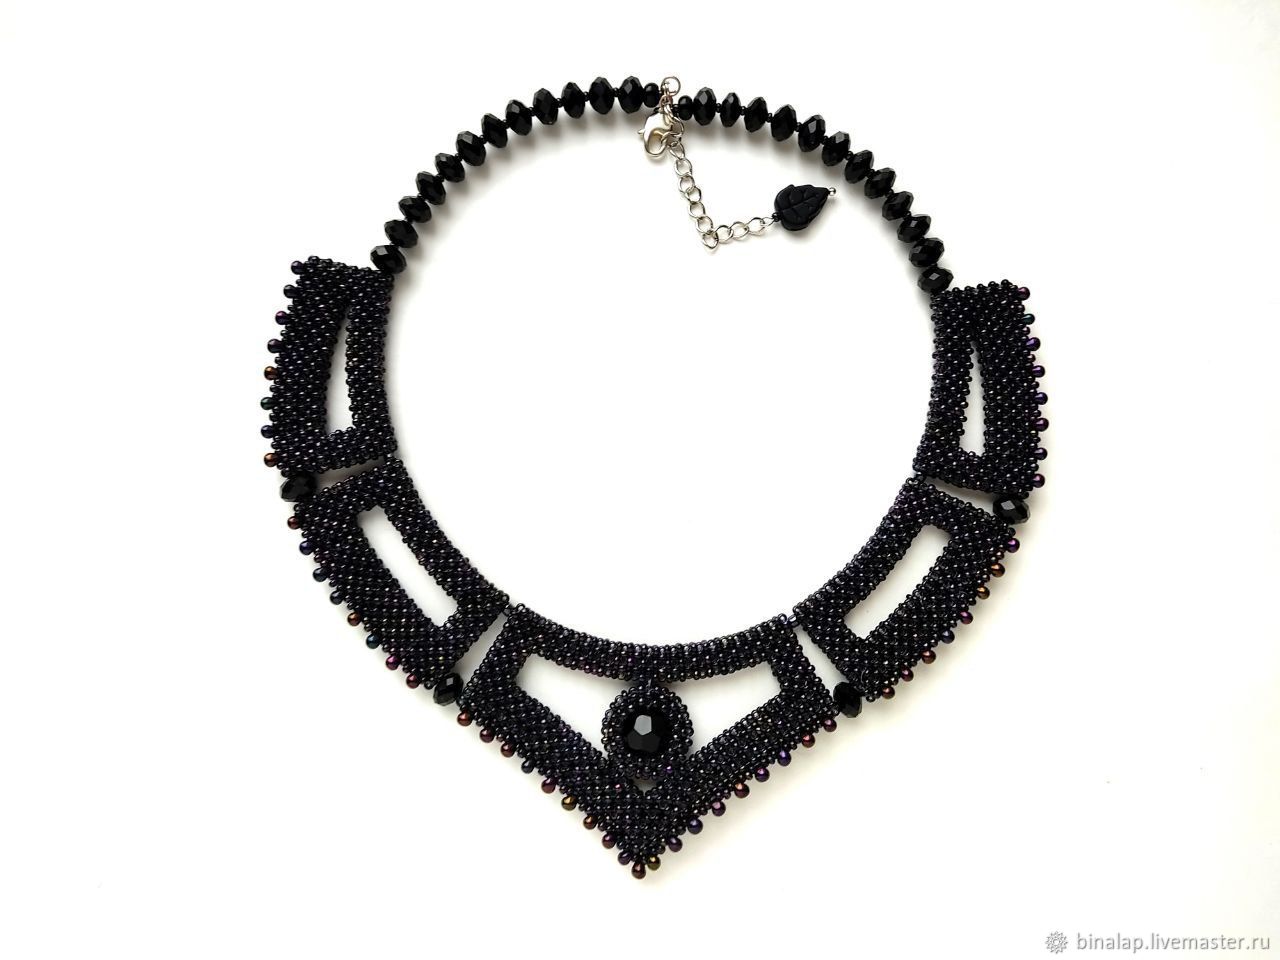 Black Gothic Necklace with agate beads, Necklace, Moscow,  Фото №1